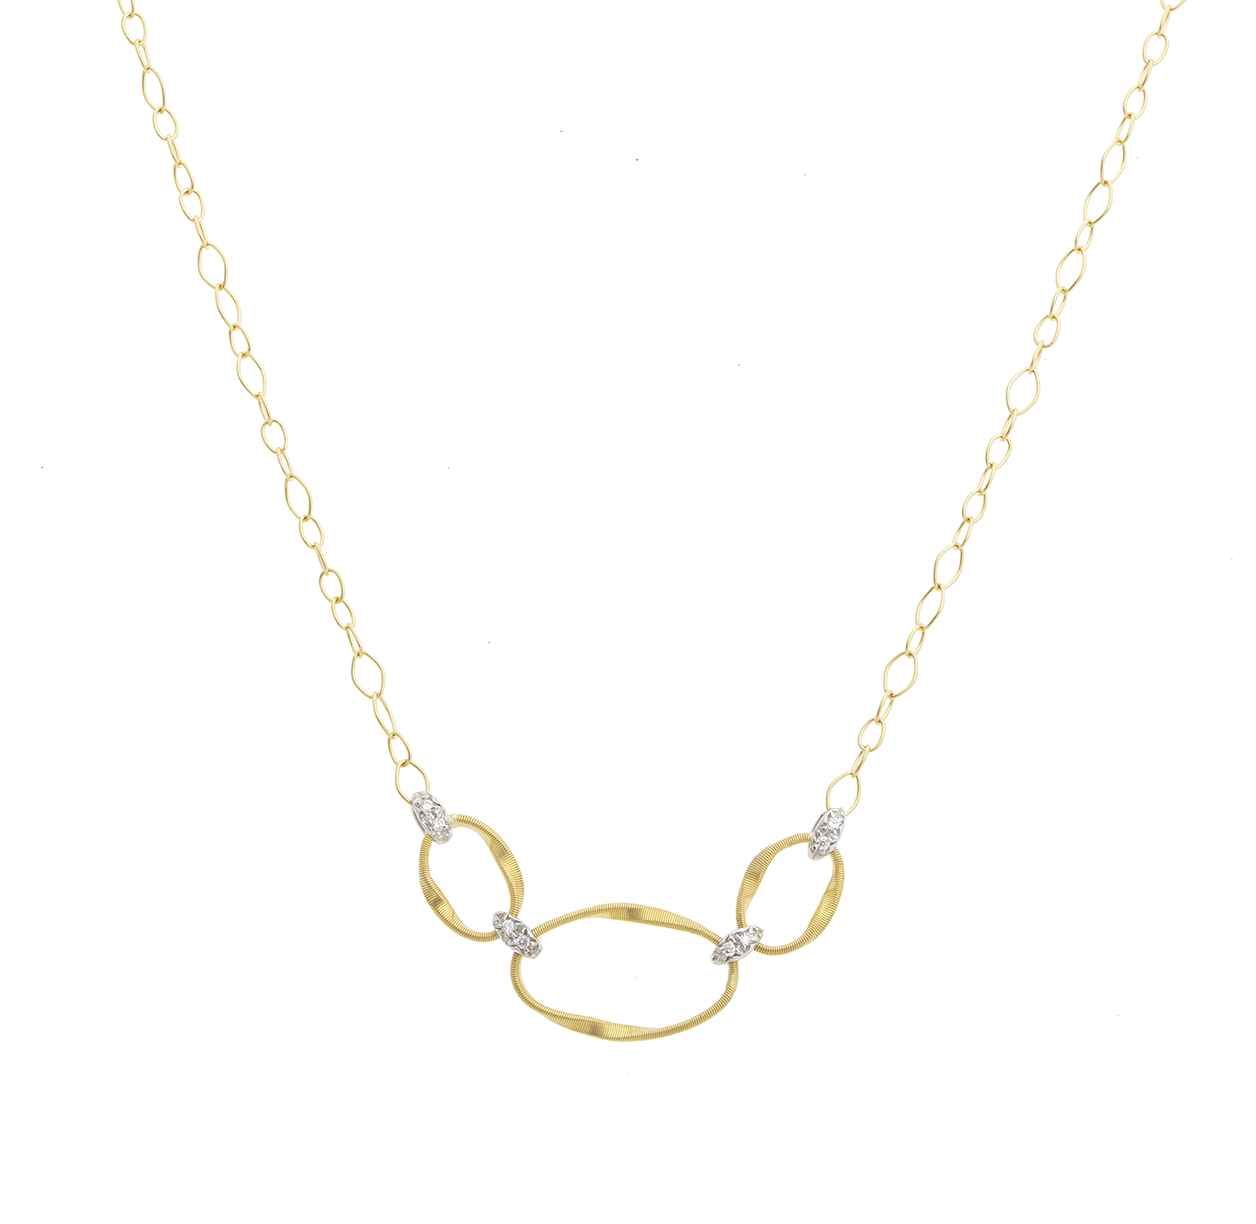 Marco Bicego Marrakech Onde 18K Yellow Gold Link Necklace